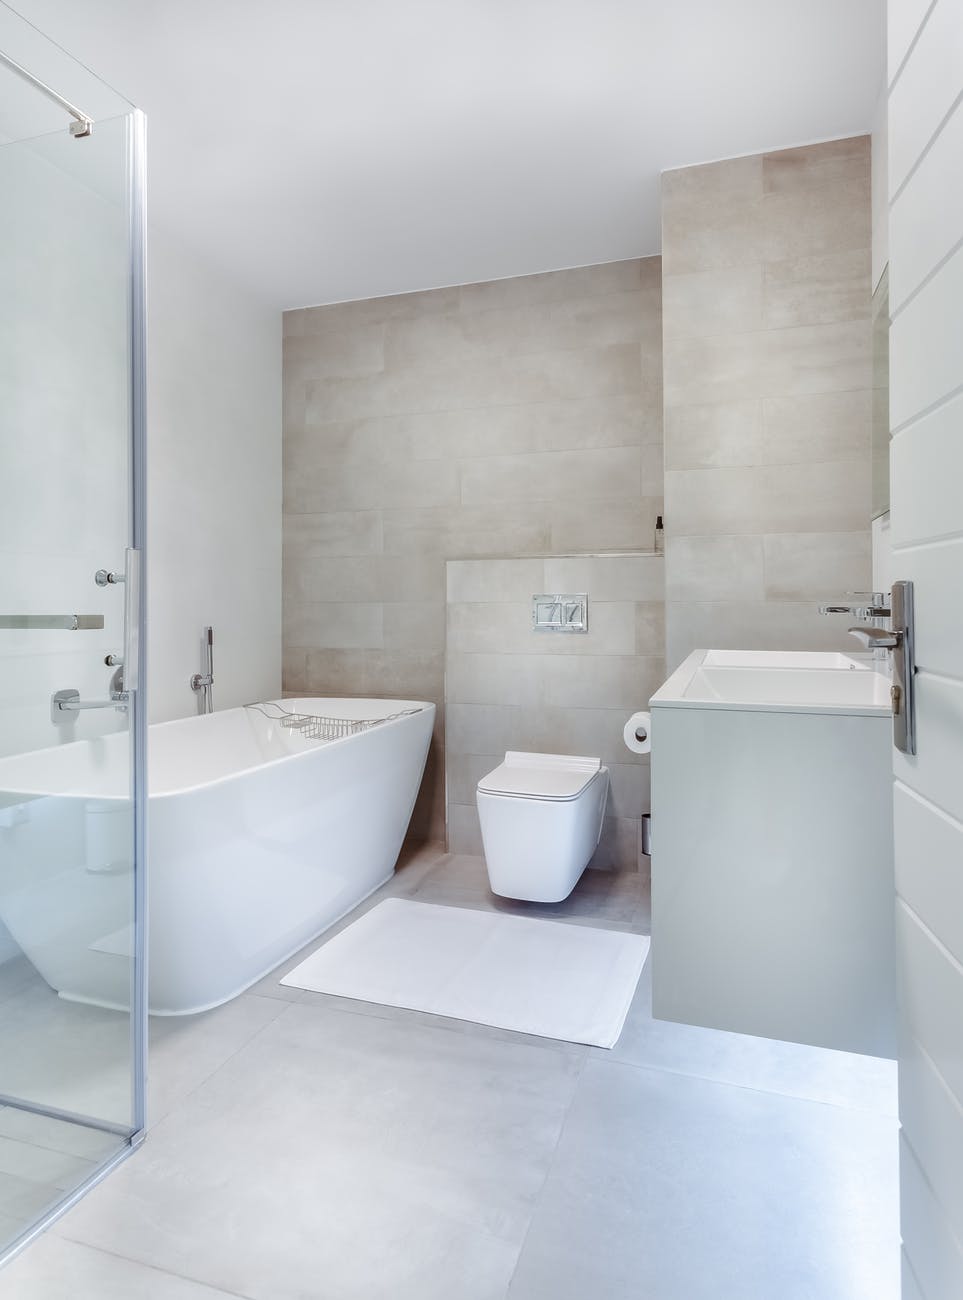 Bathroom cleaning services Sydney like a professional